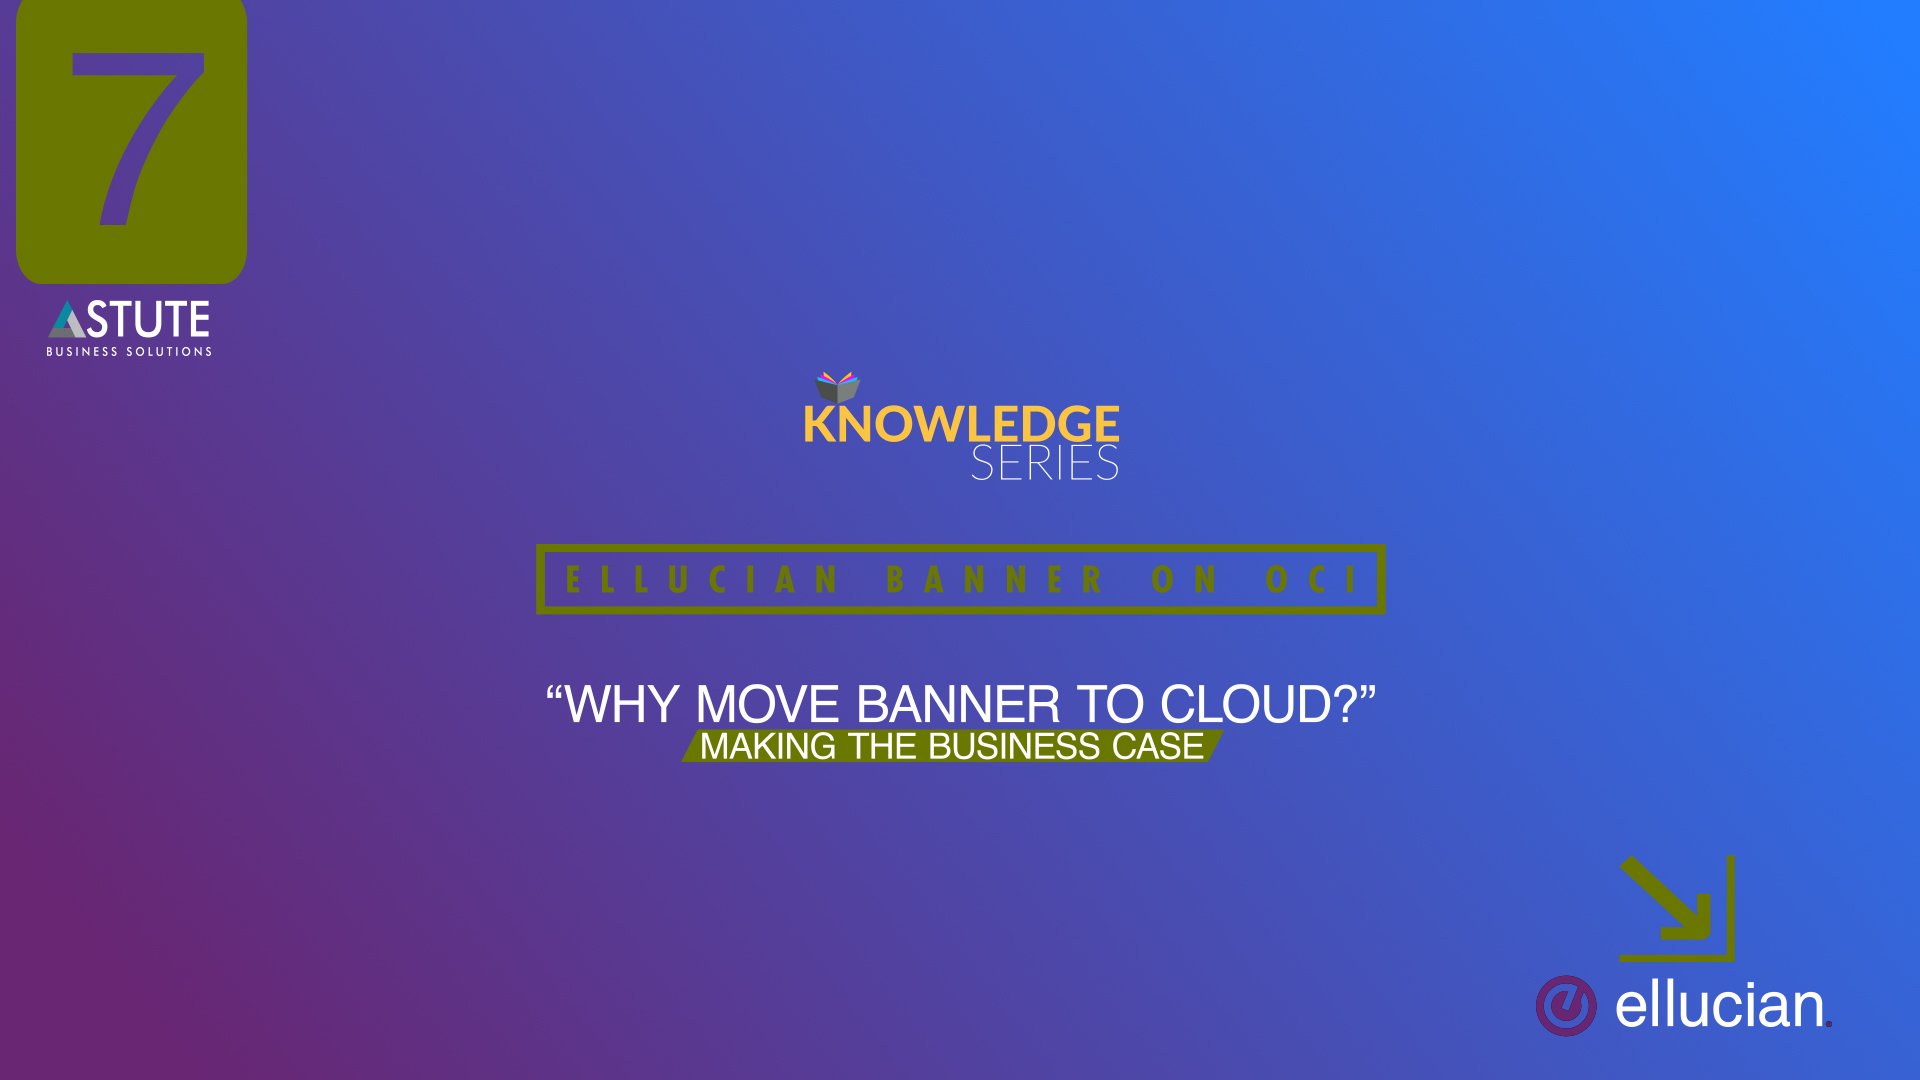 #7 Ellucian _Why Move Banner To Cloud_- Making the business case for Banner to cloud